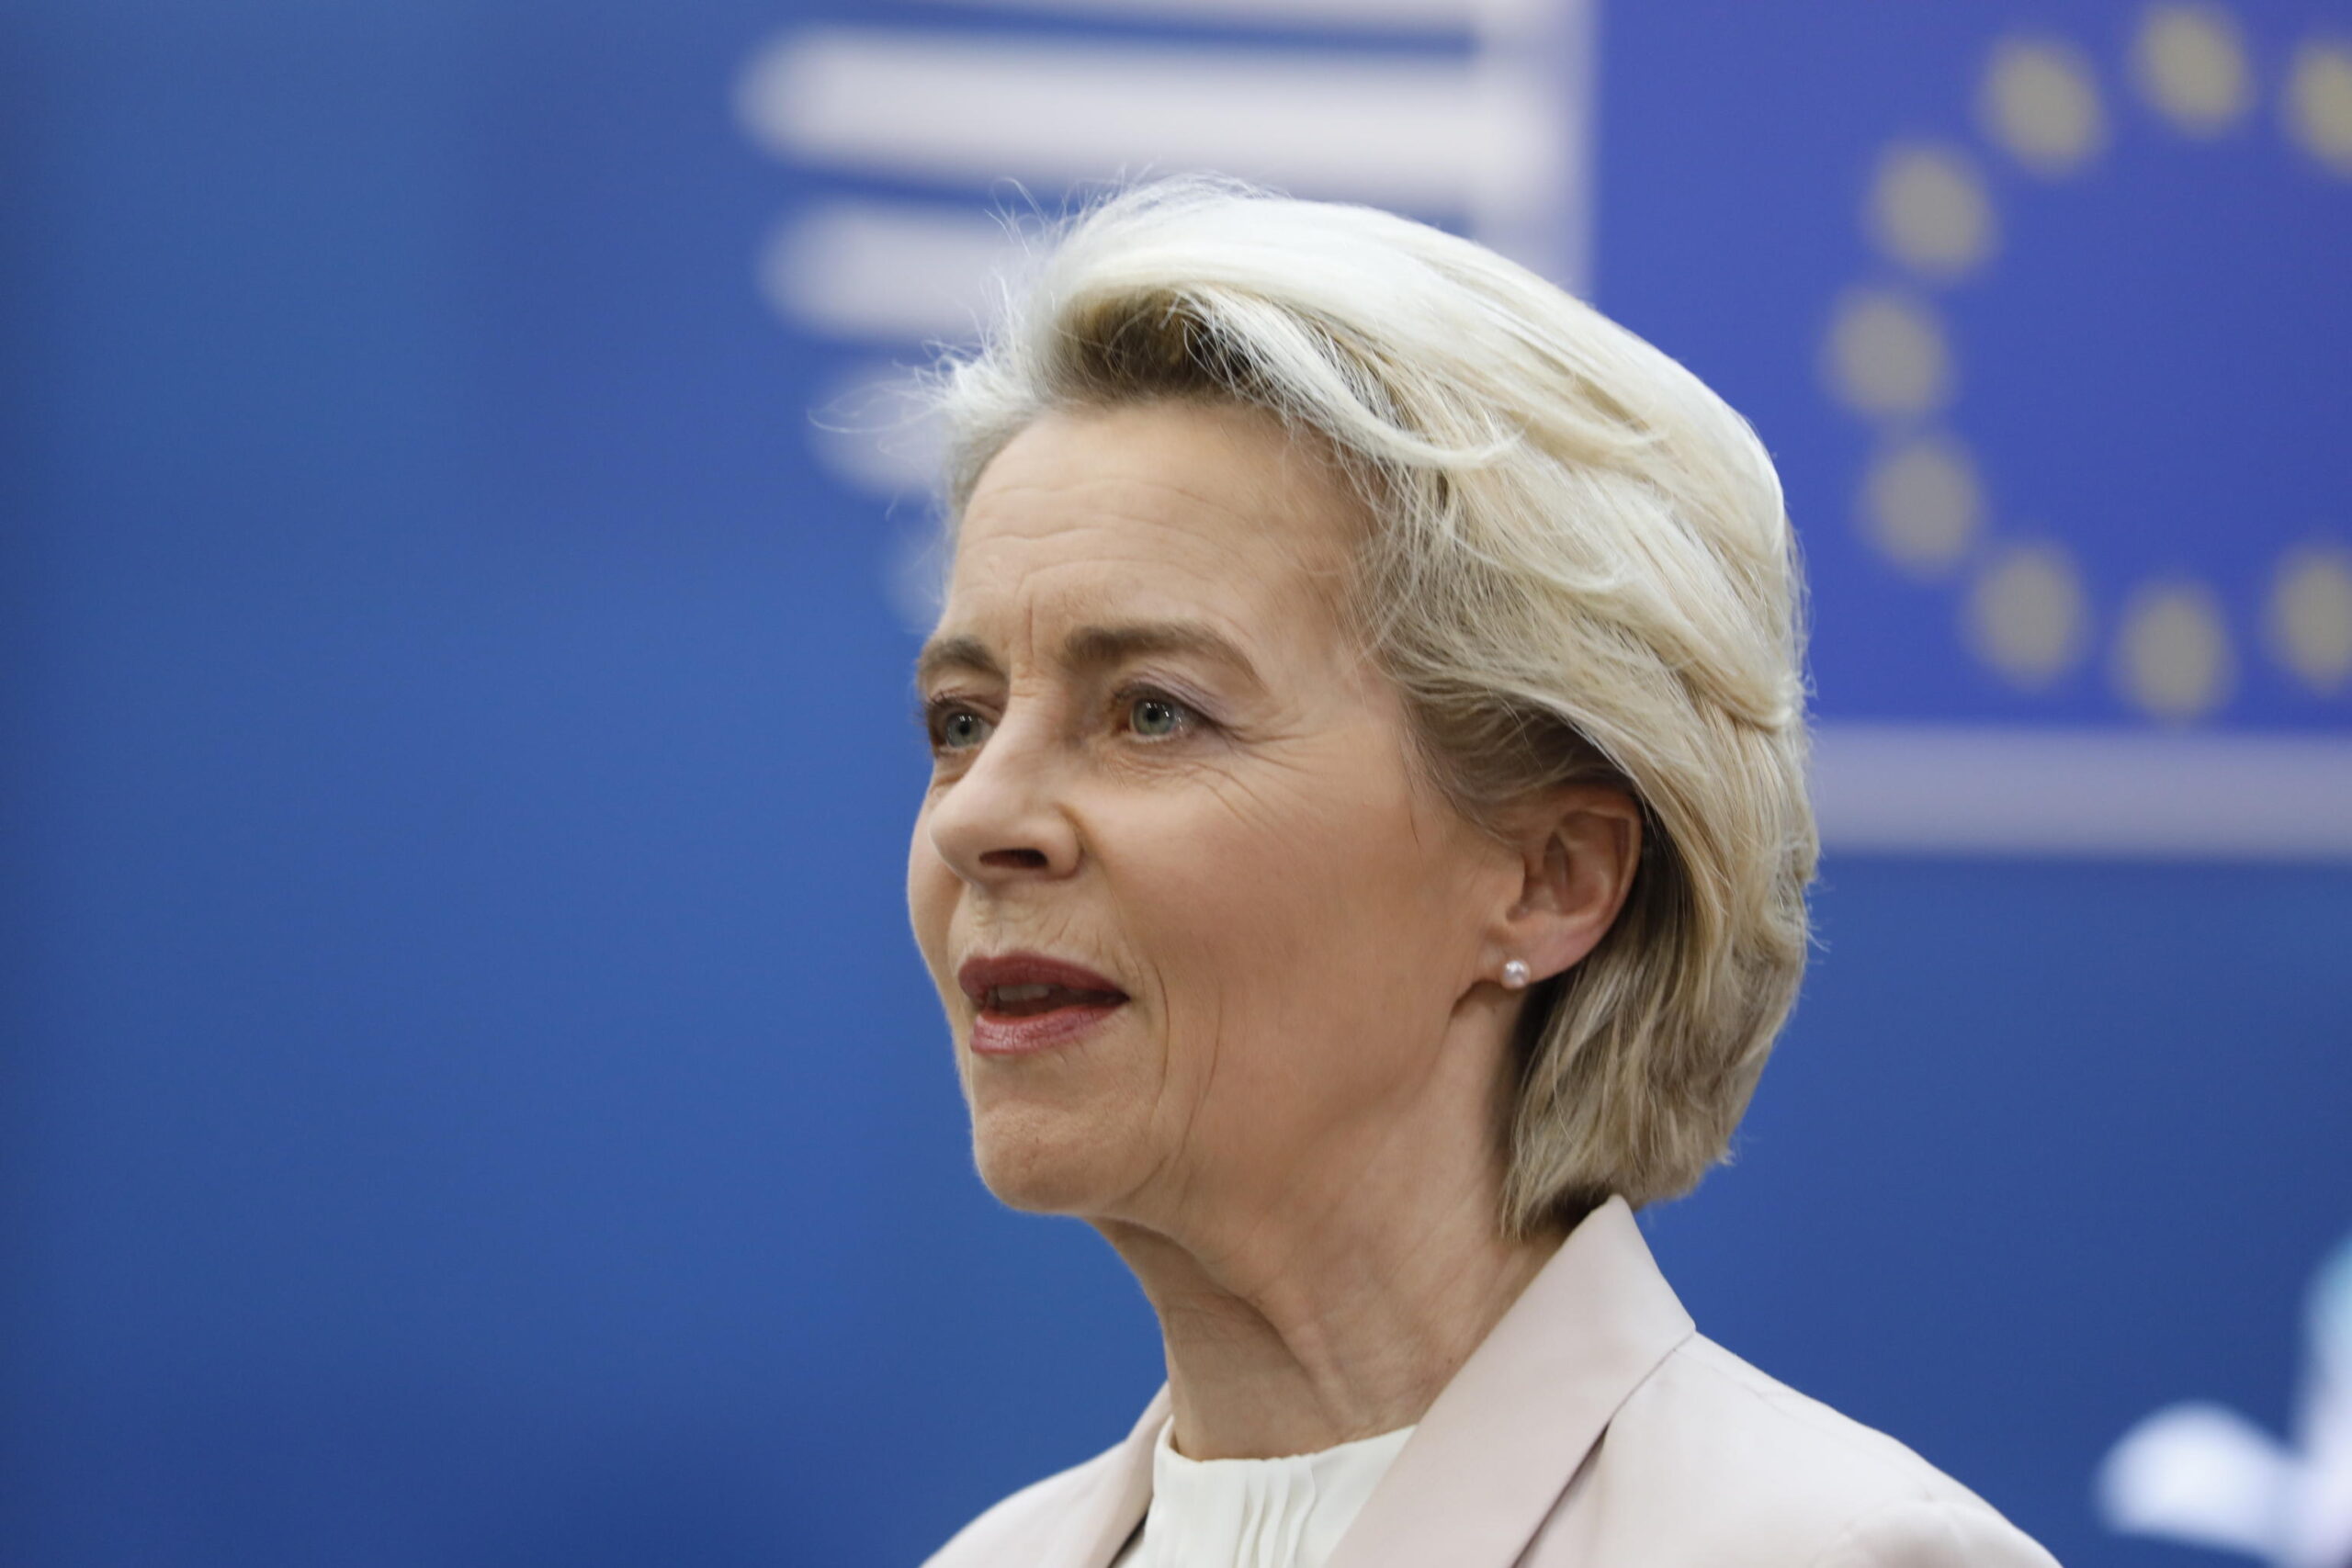 epa09846779 European Commission President Ursula von der Leyen arrives for the European Council Summit in Brussels, Belgium, 24 March 2022. The European Council summit starts with the participation of US President Joe Biden to address Russia's ongoing military aggression against Ukraine. After that, Head of States will continue discussions on how best to support Ukraine in these dramatic circumstances.  EPA/JULIEN WARNAND